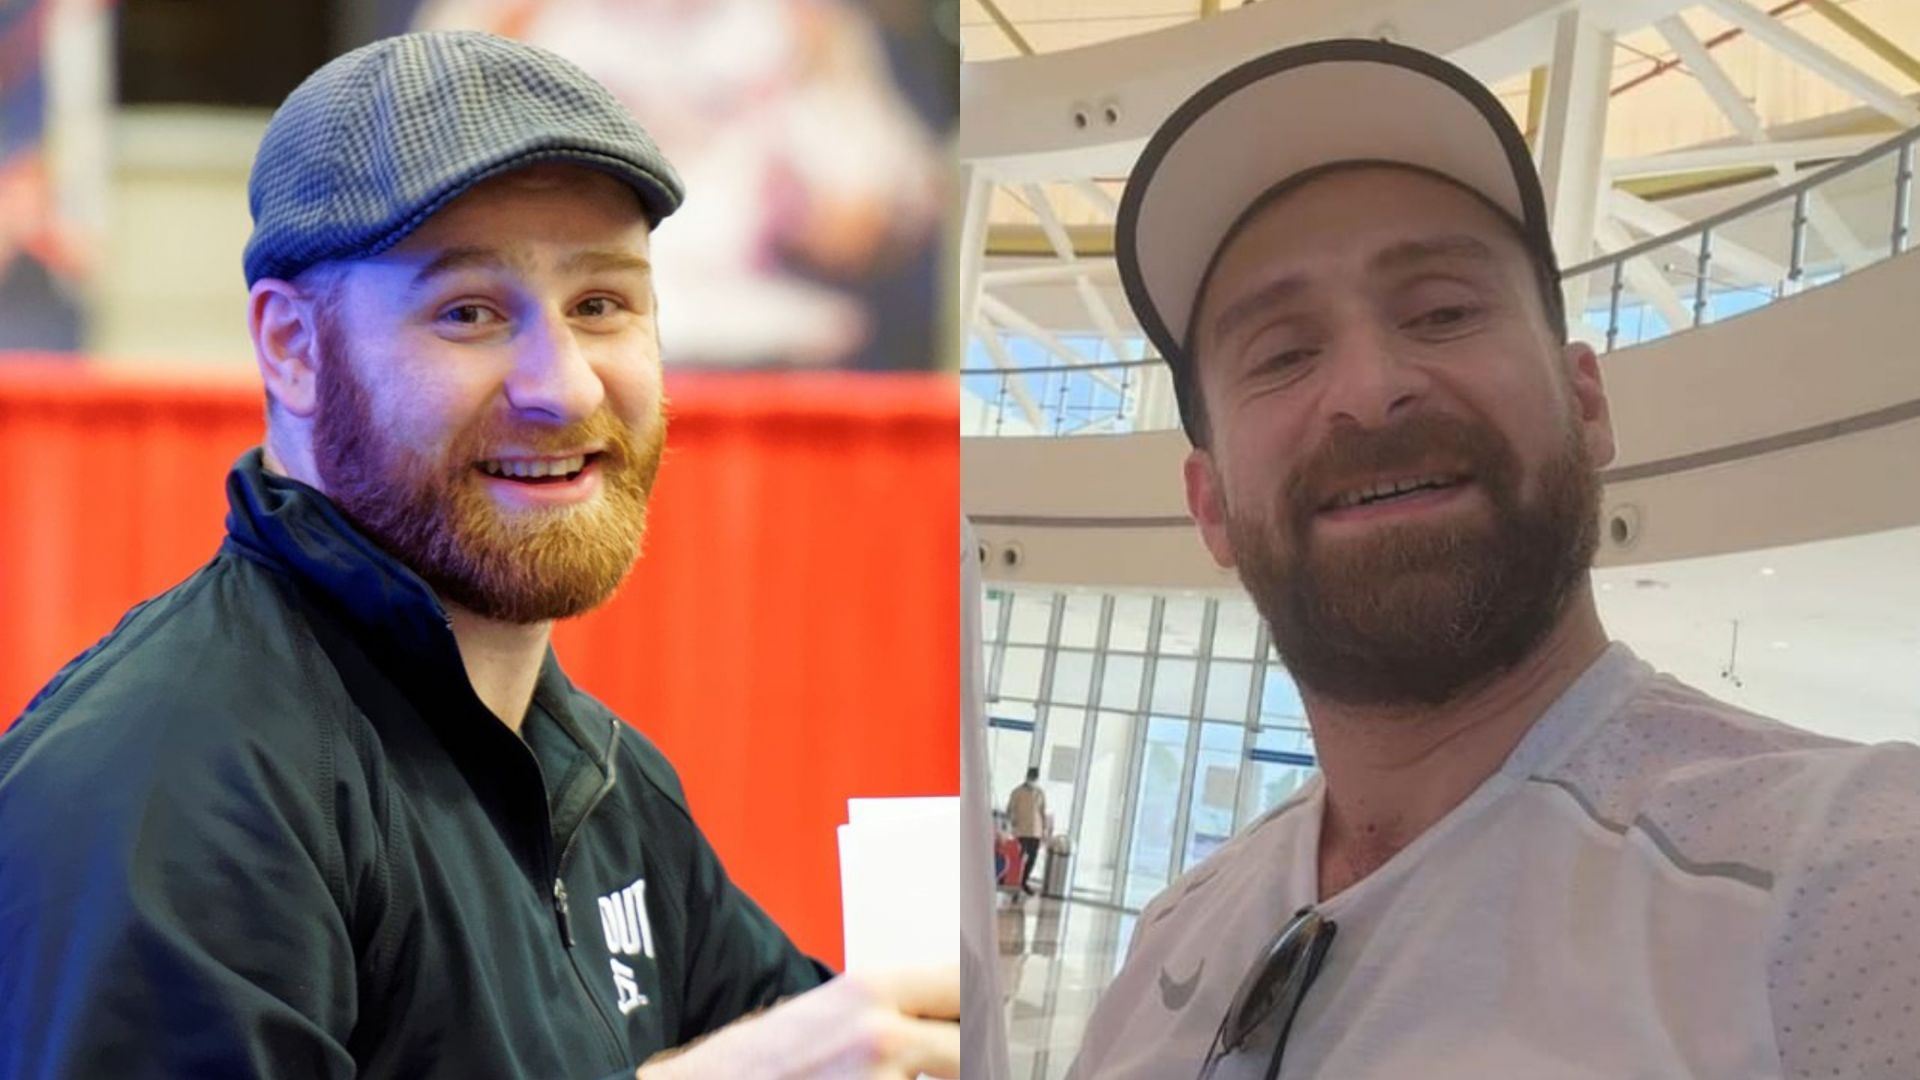 WWE Superstar Sami Zayn (left) and Egyptian actor Nedal El Shafey (right)